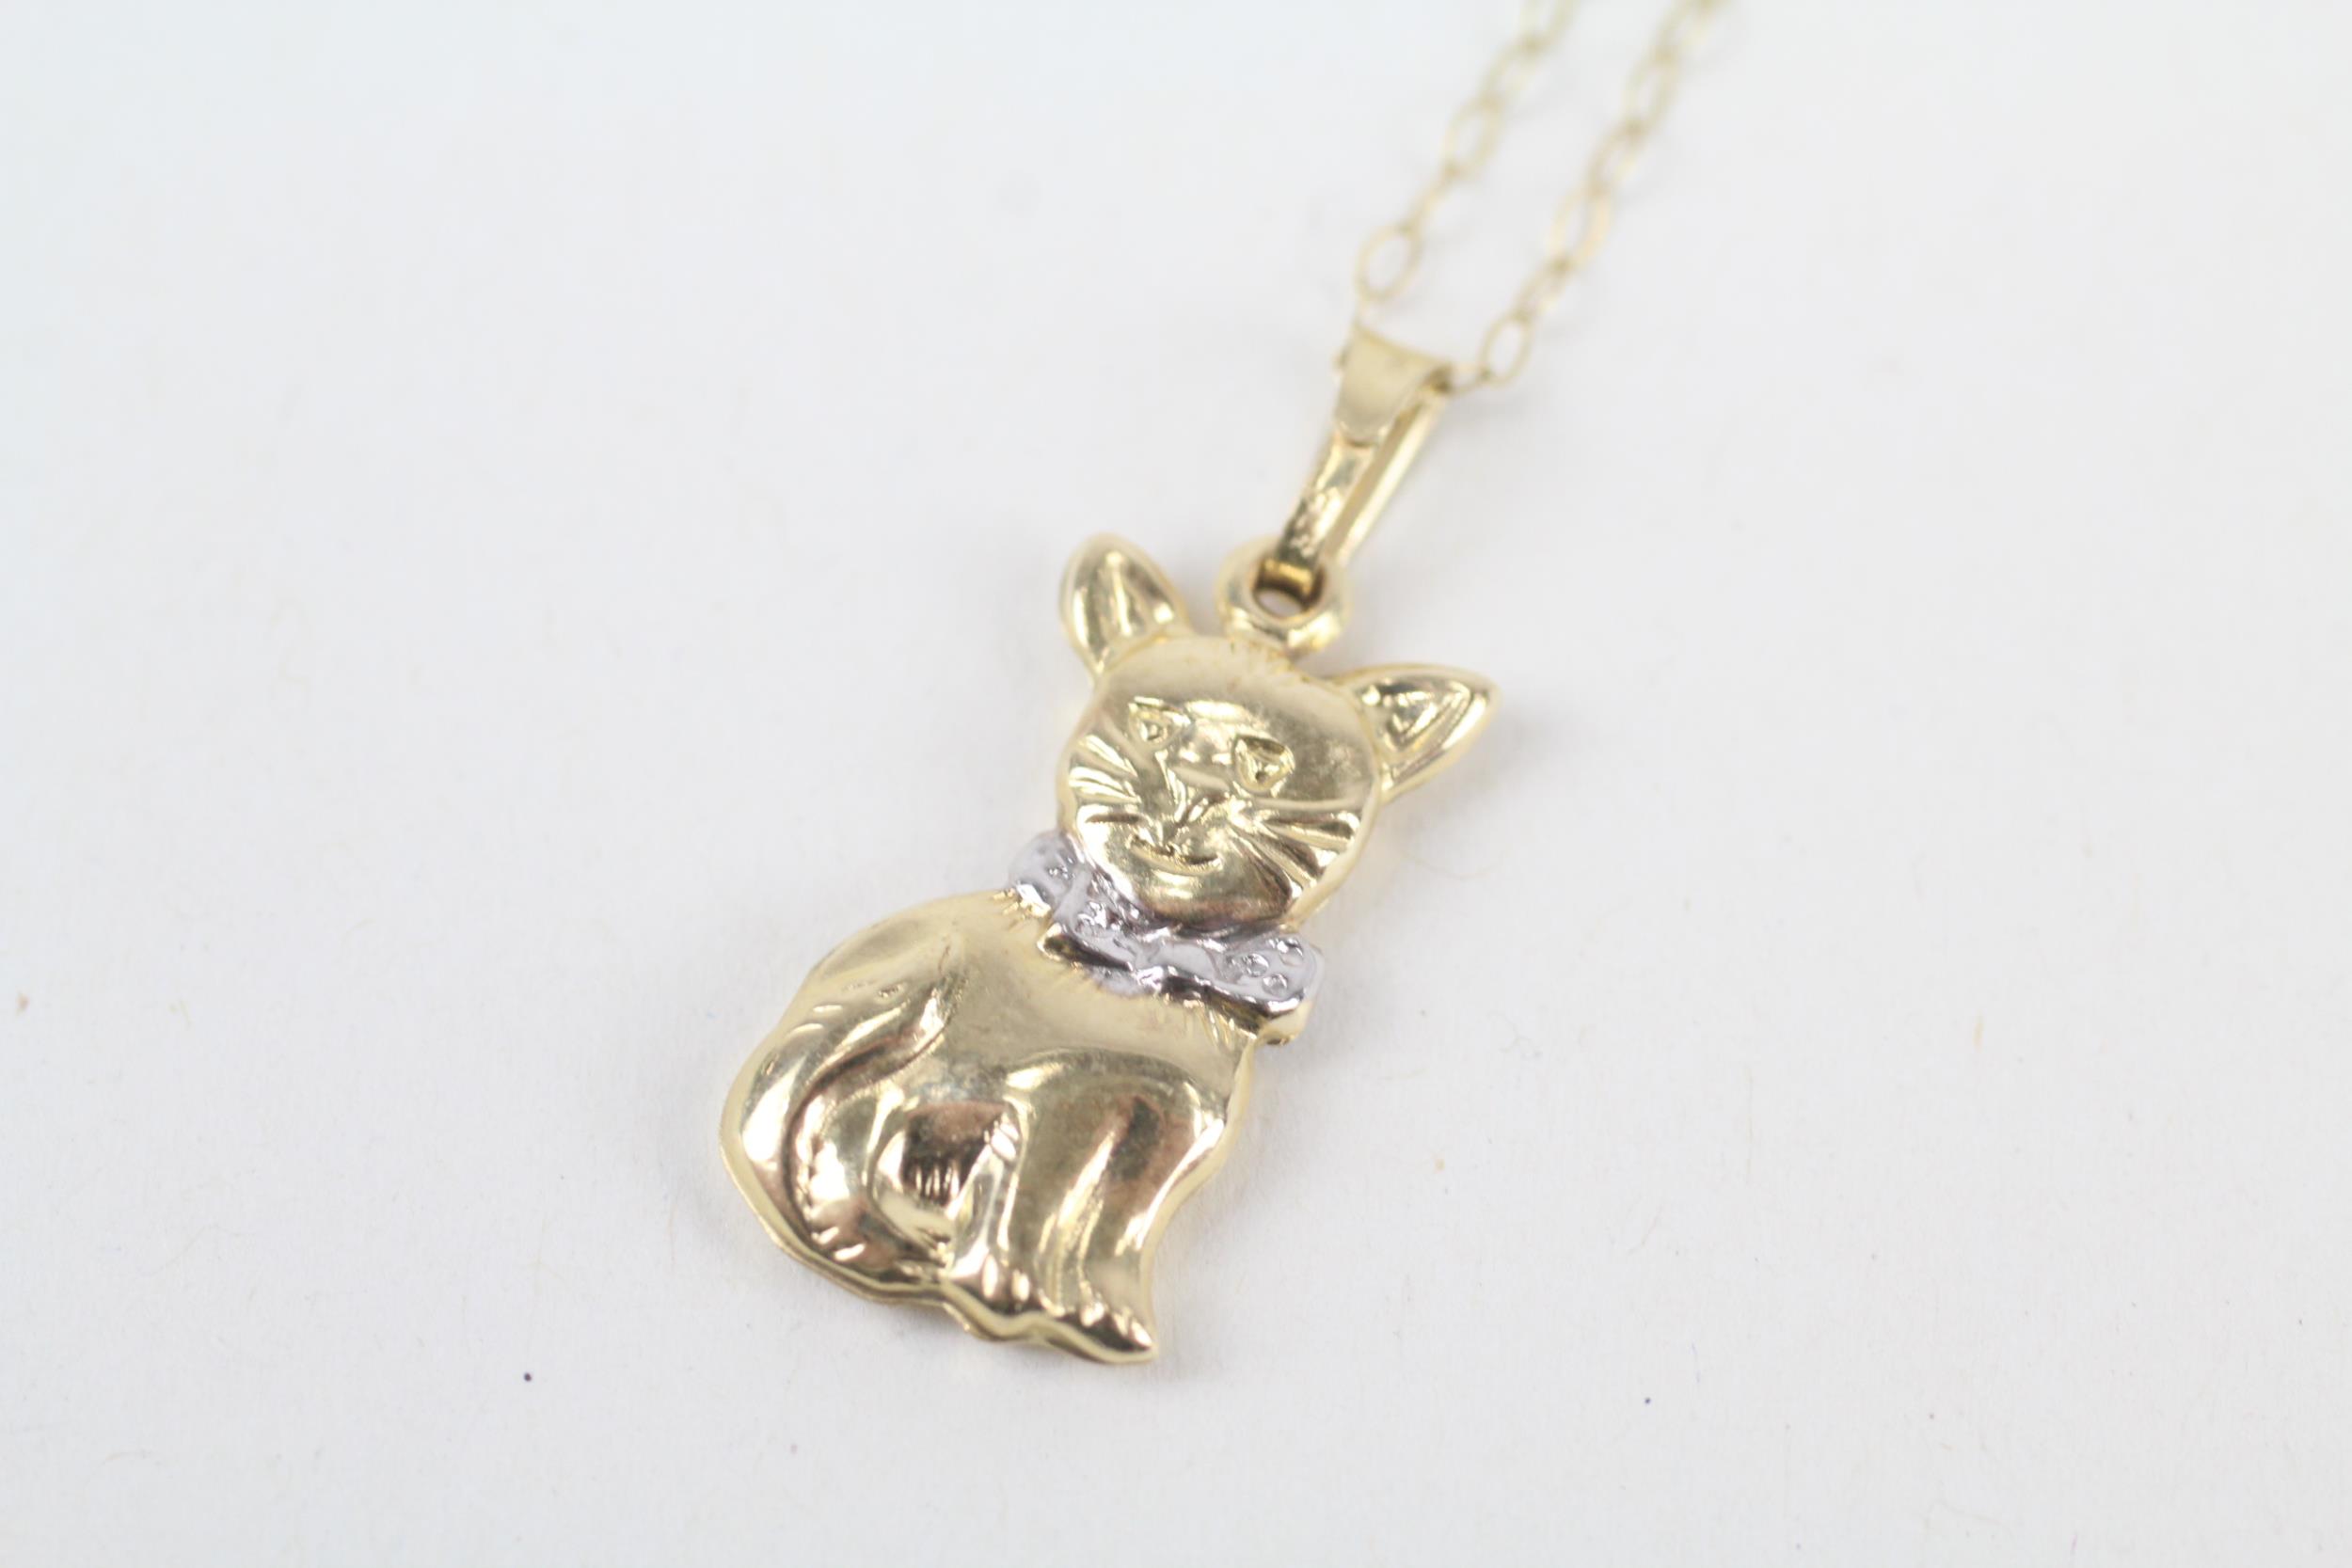 9ct gold cat pendant necklace - Image 2 of 4